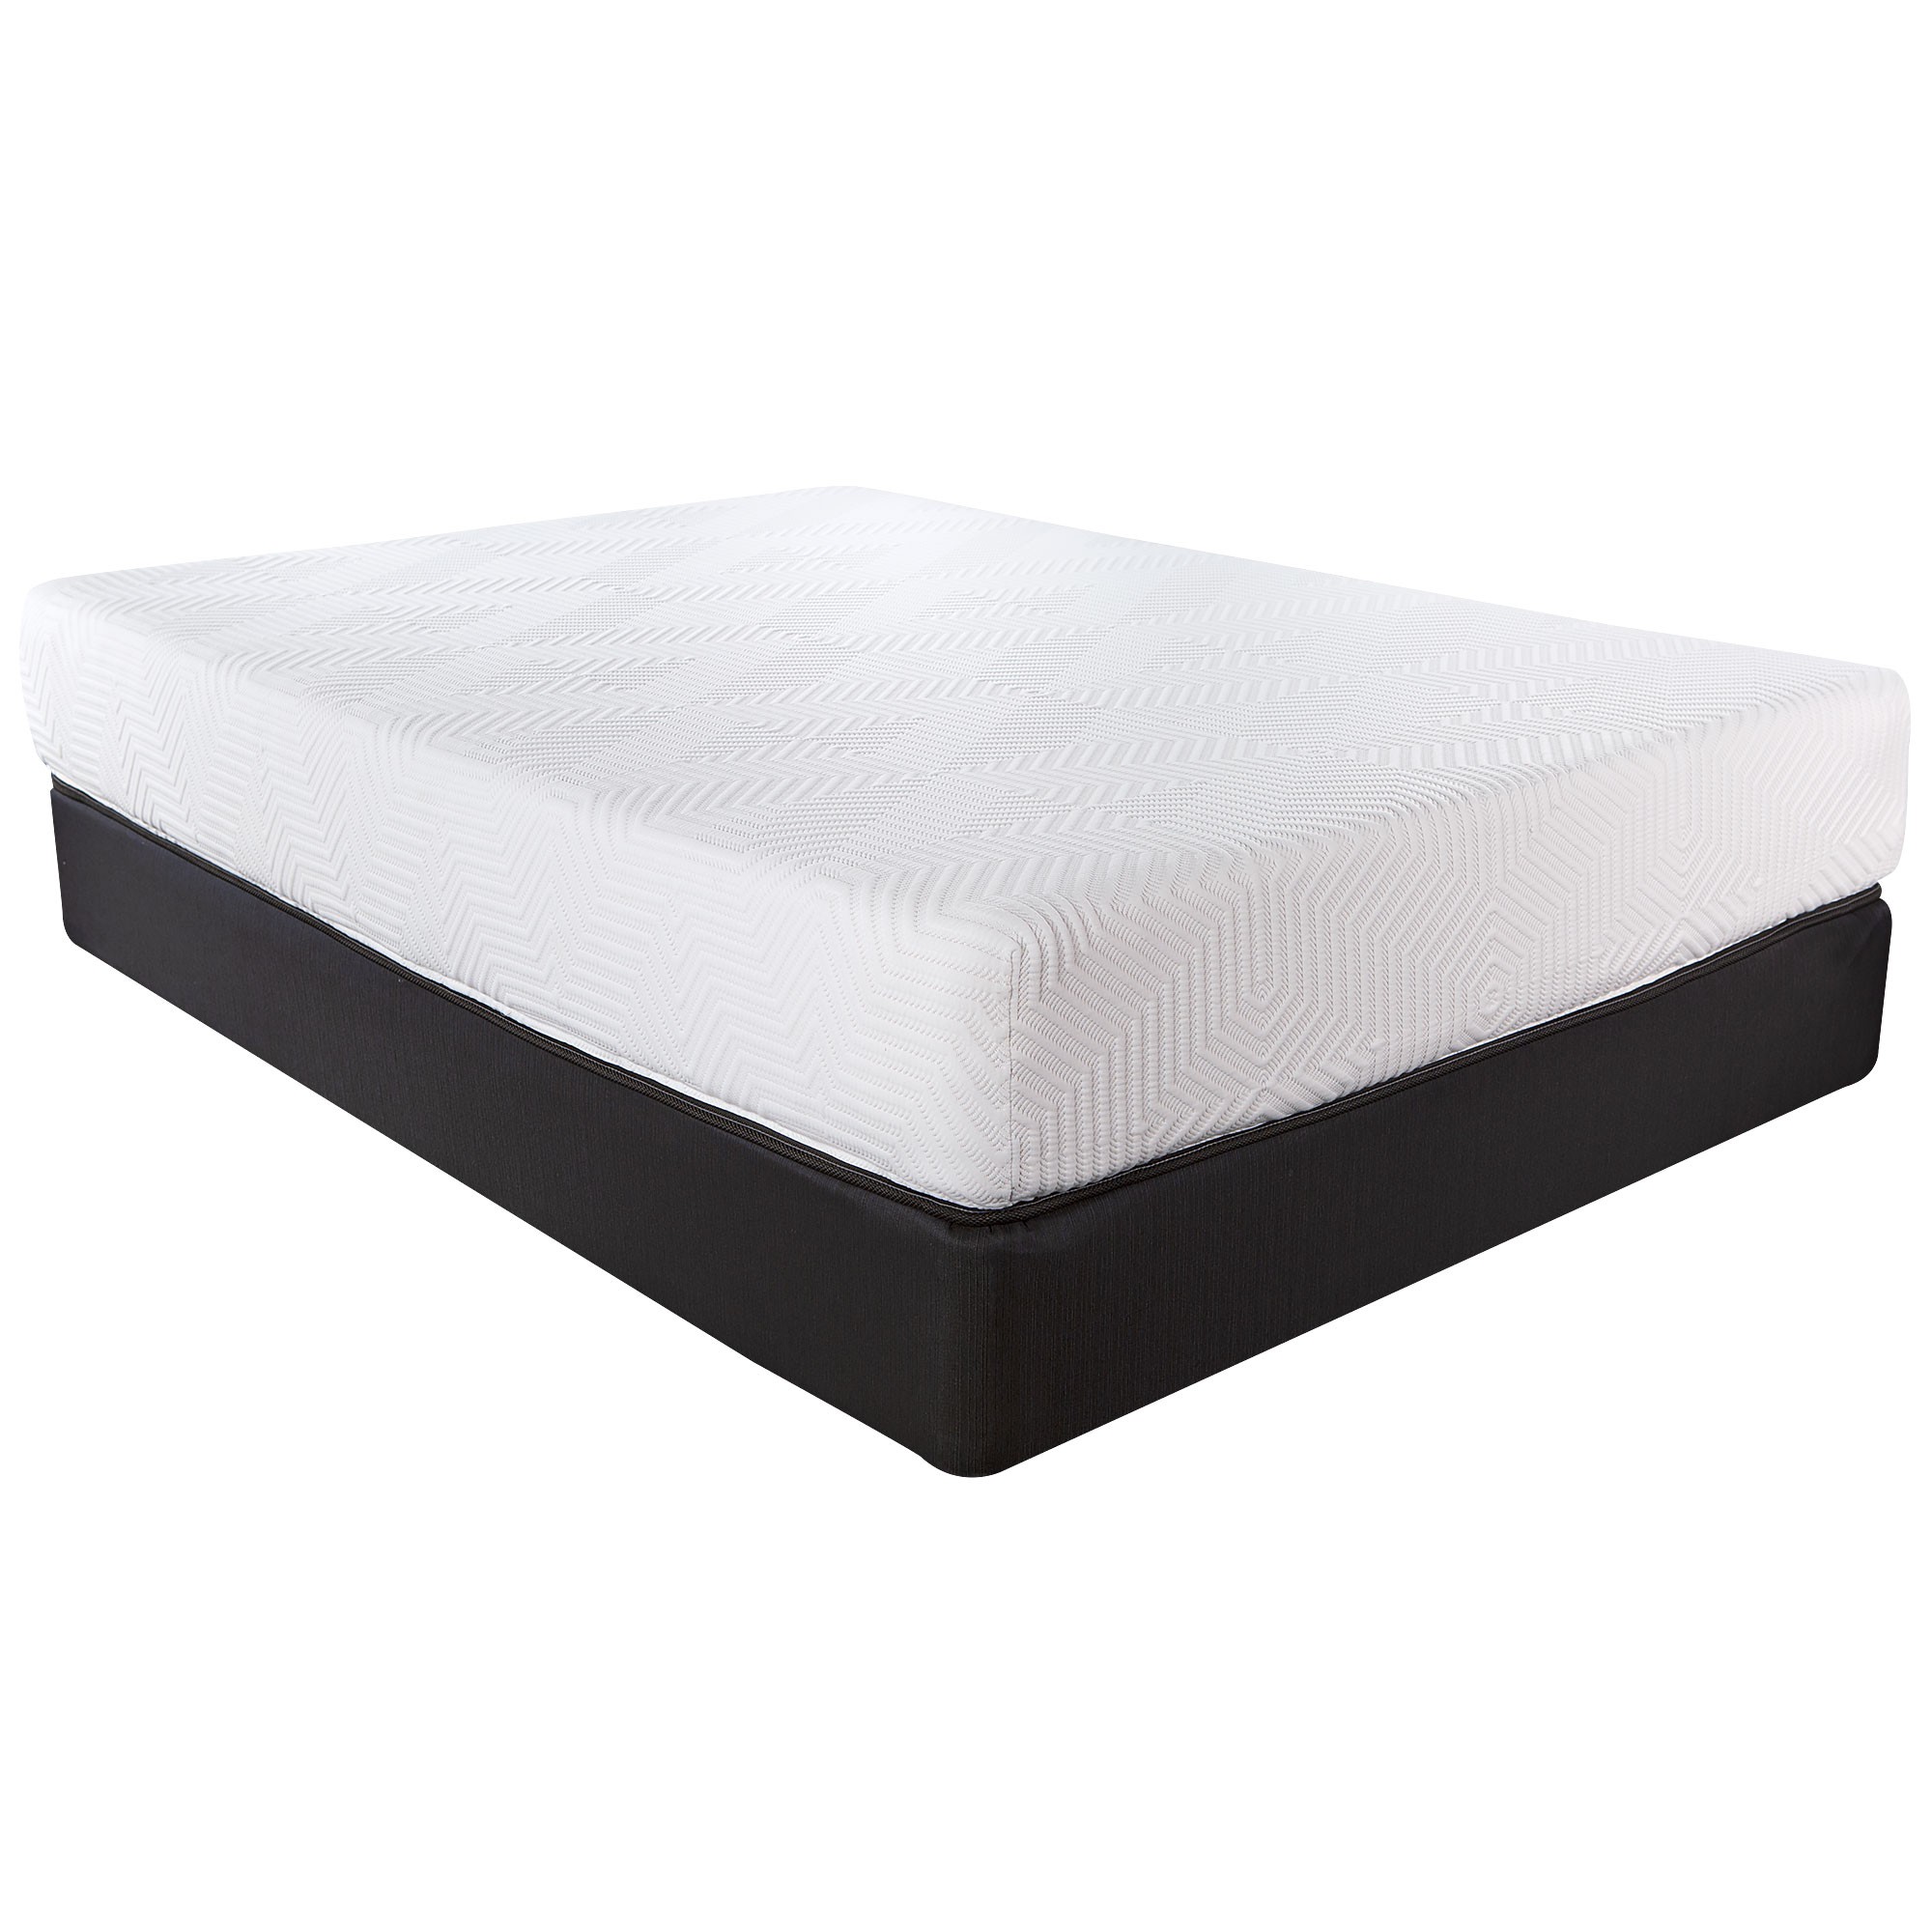 10.5" Hybrid Lux Memory Foam And Wrapped Coil Mattress Twin Xl-391635-1